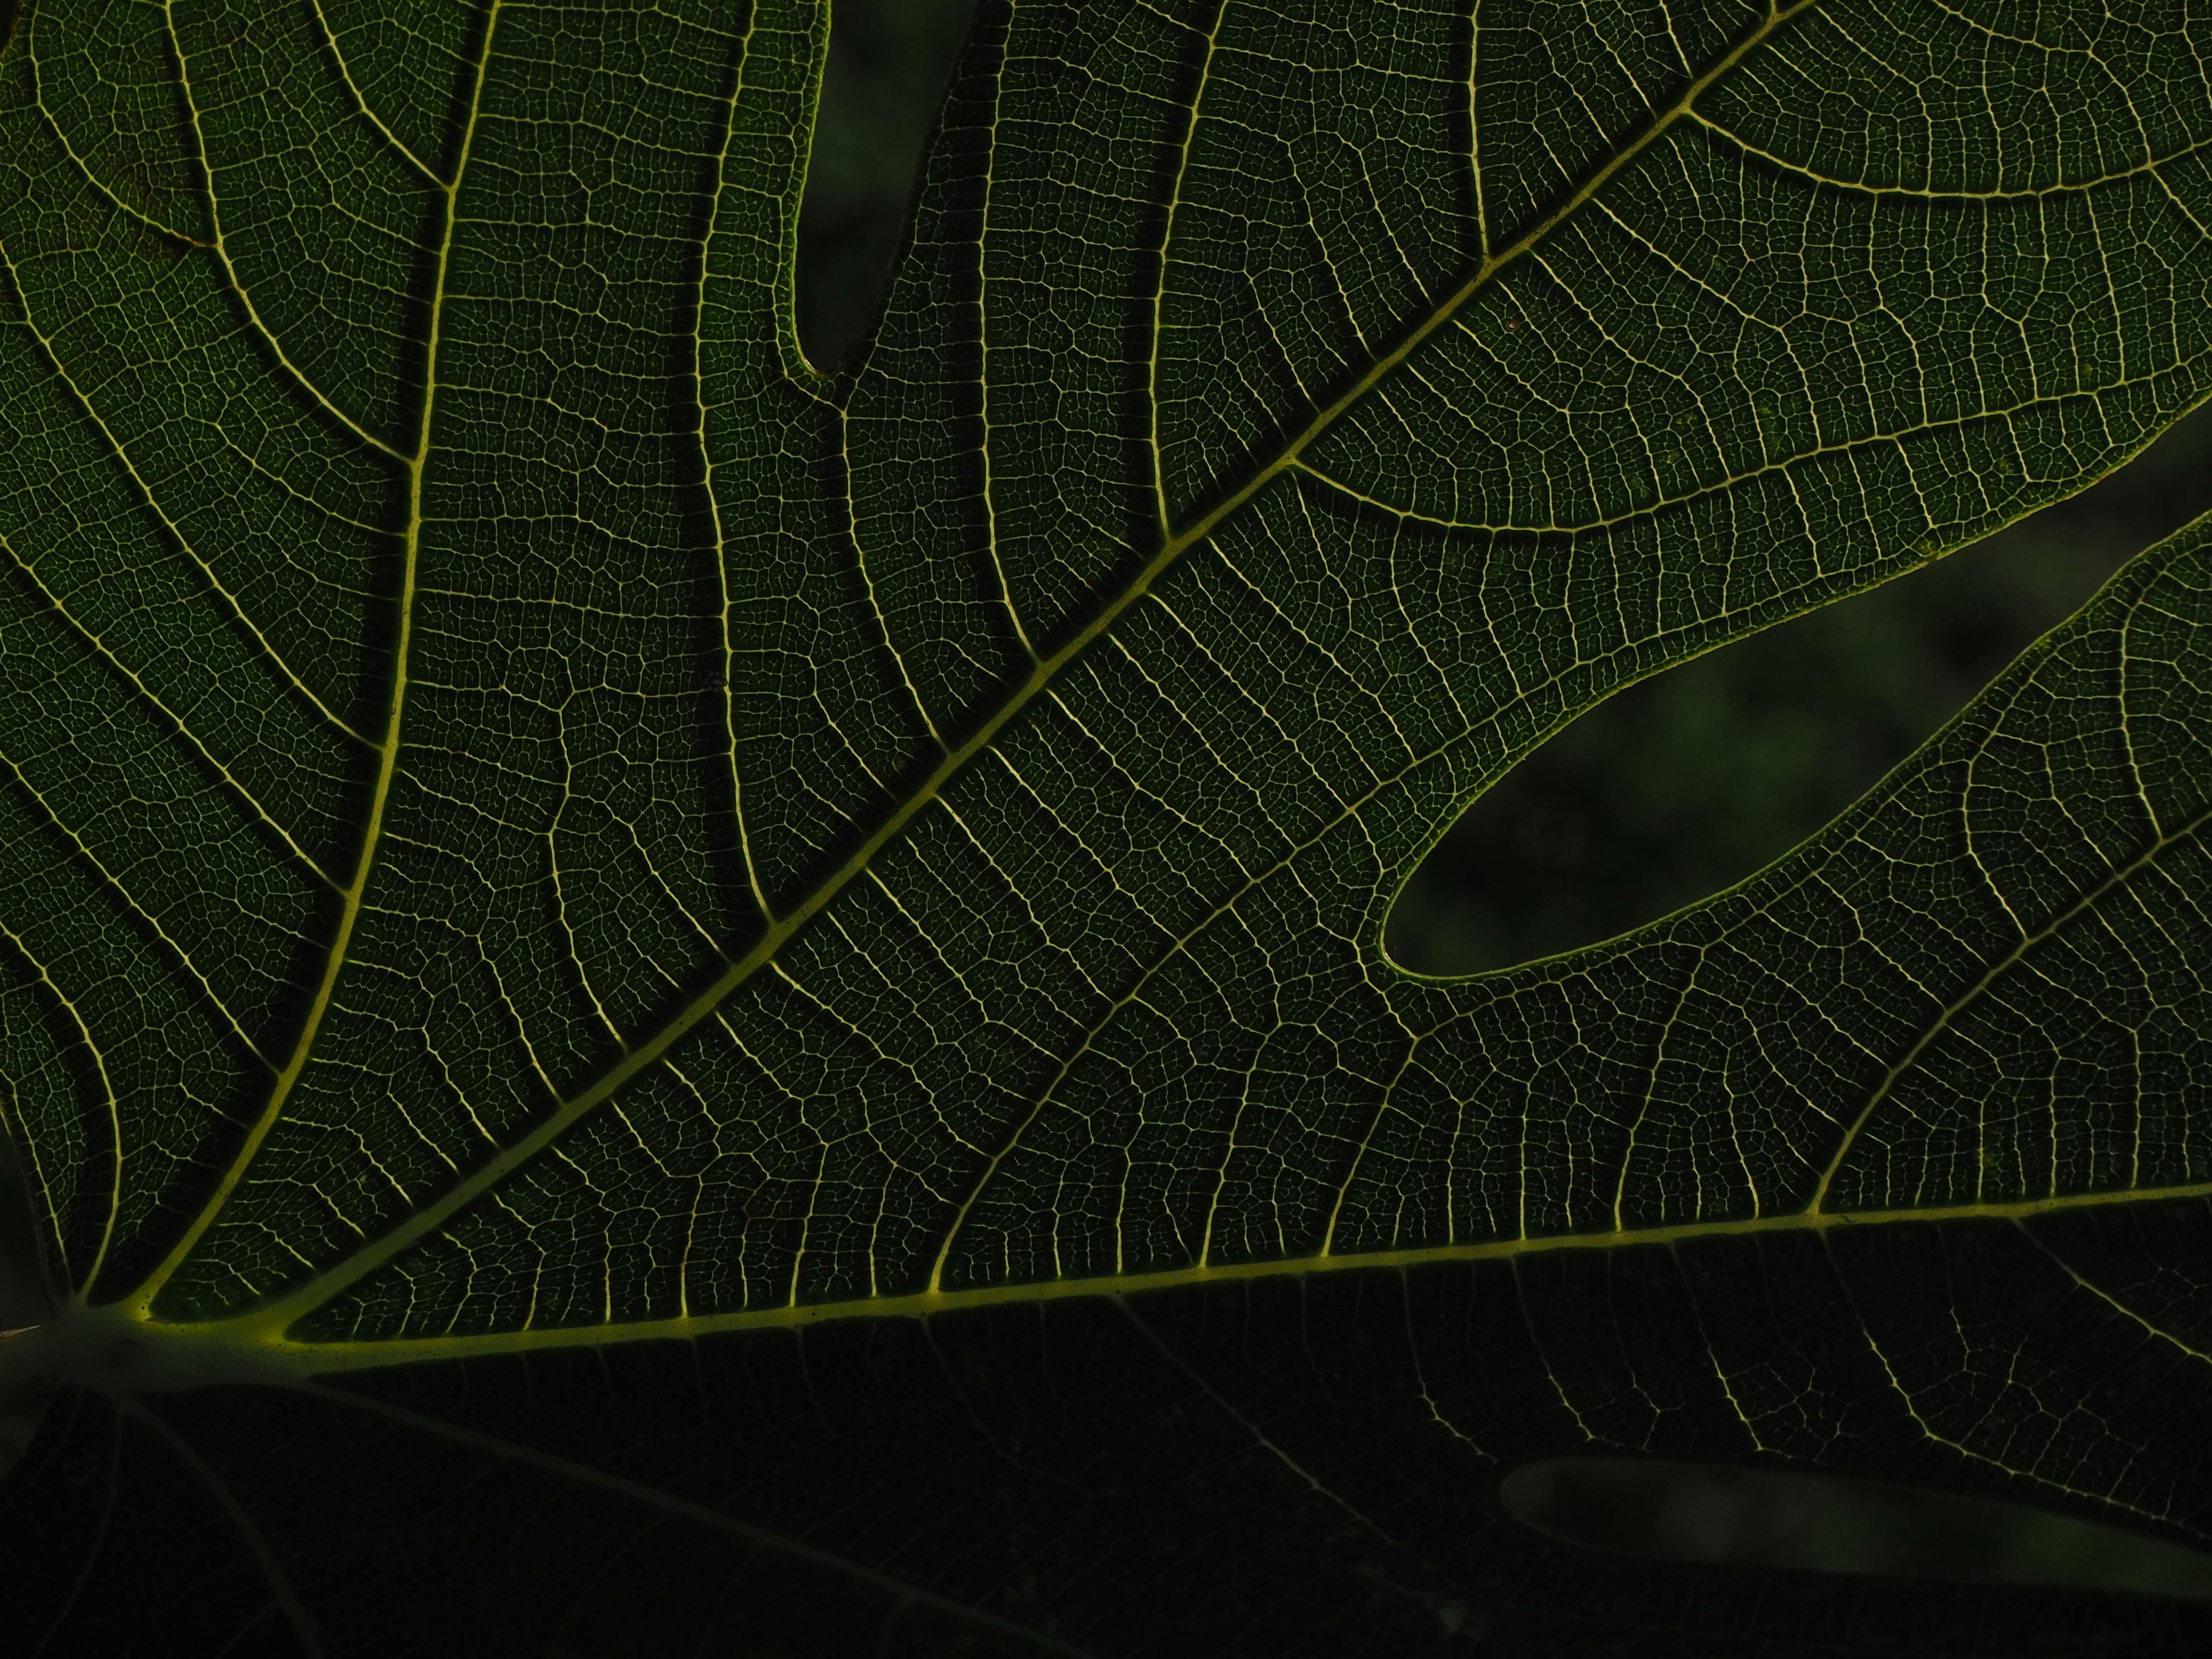 Green Flat Oblong Leaf Plant on Close Up Photography · Free Stock Photo